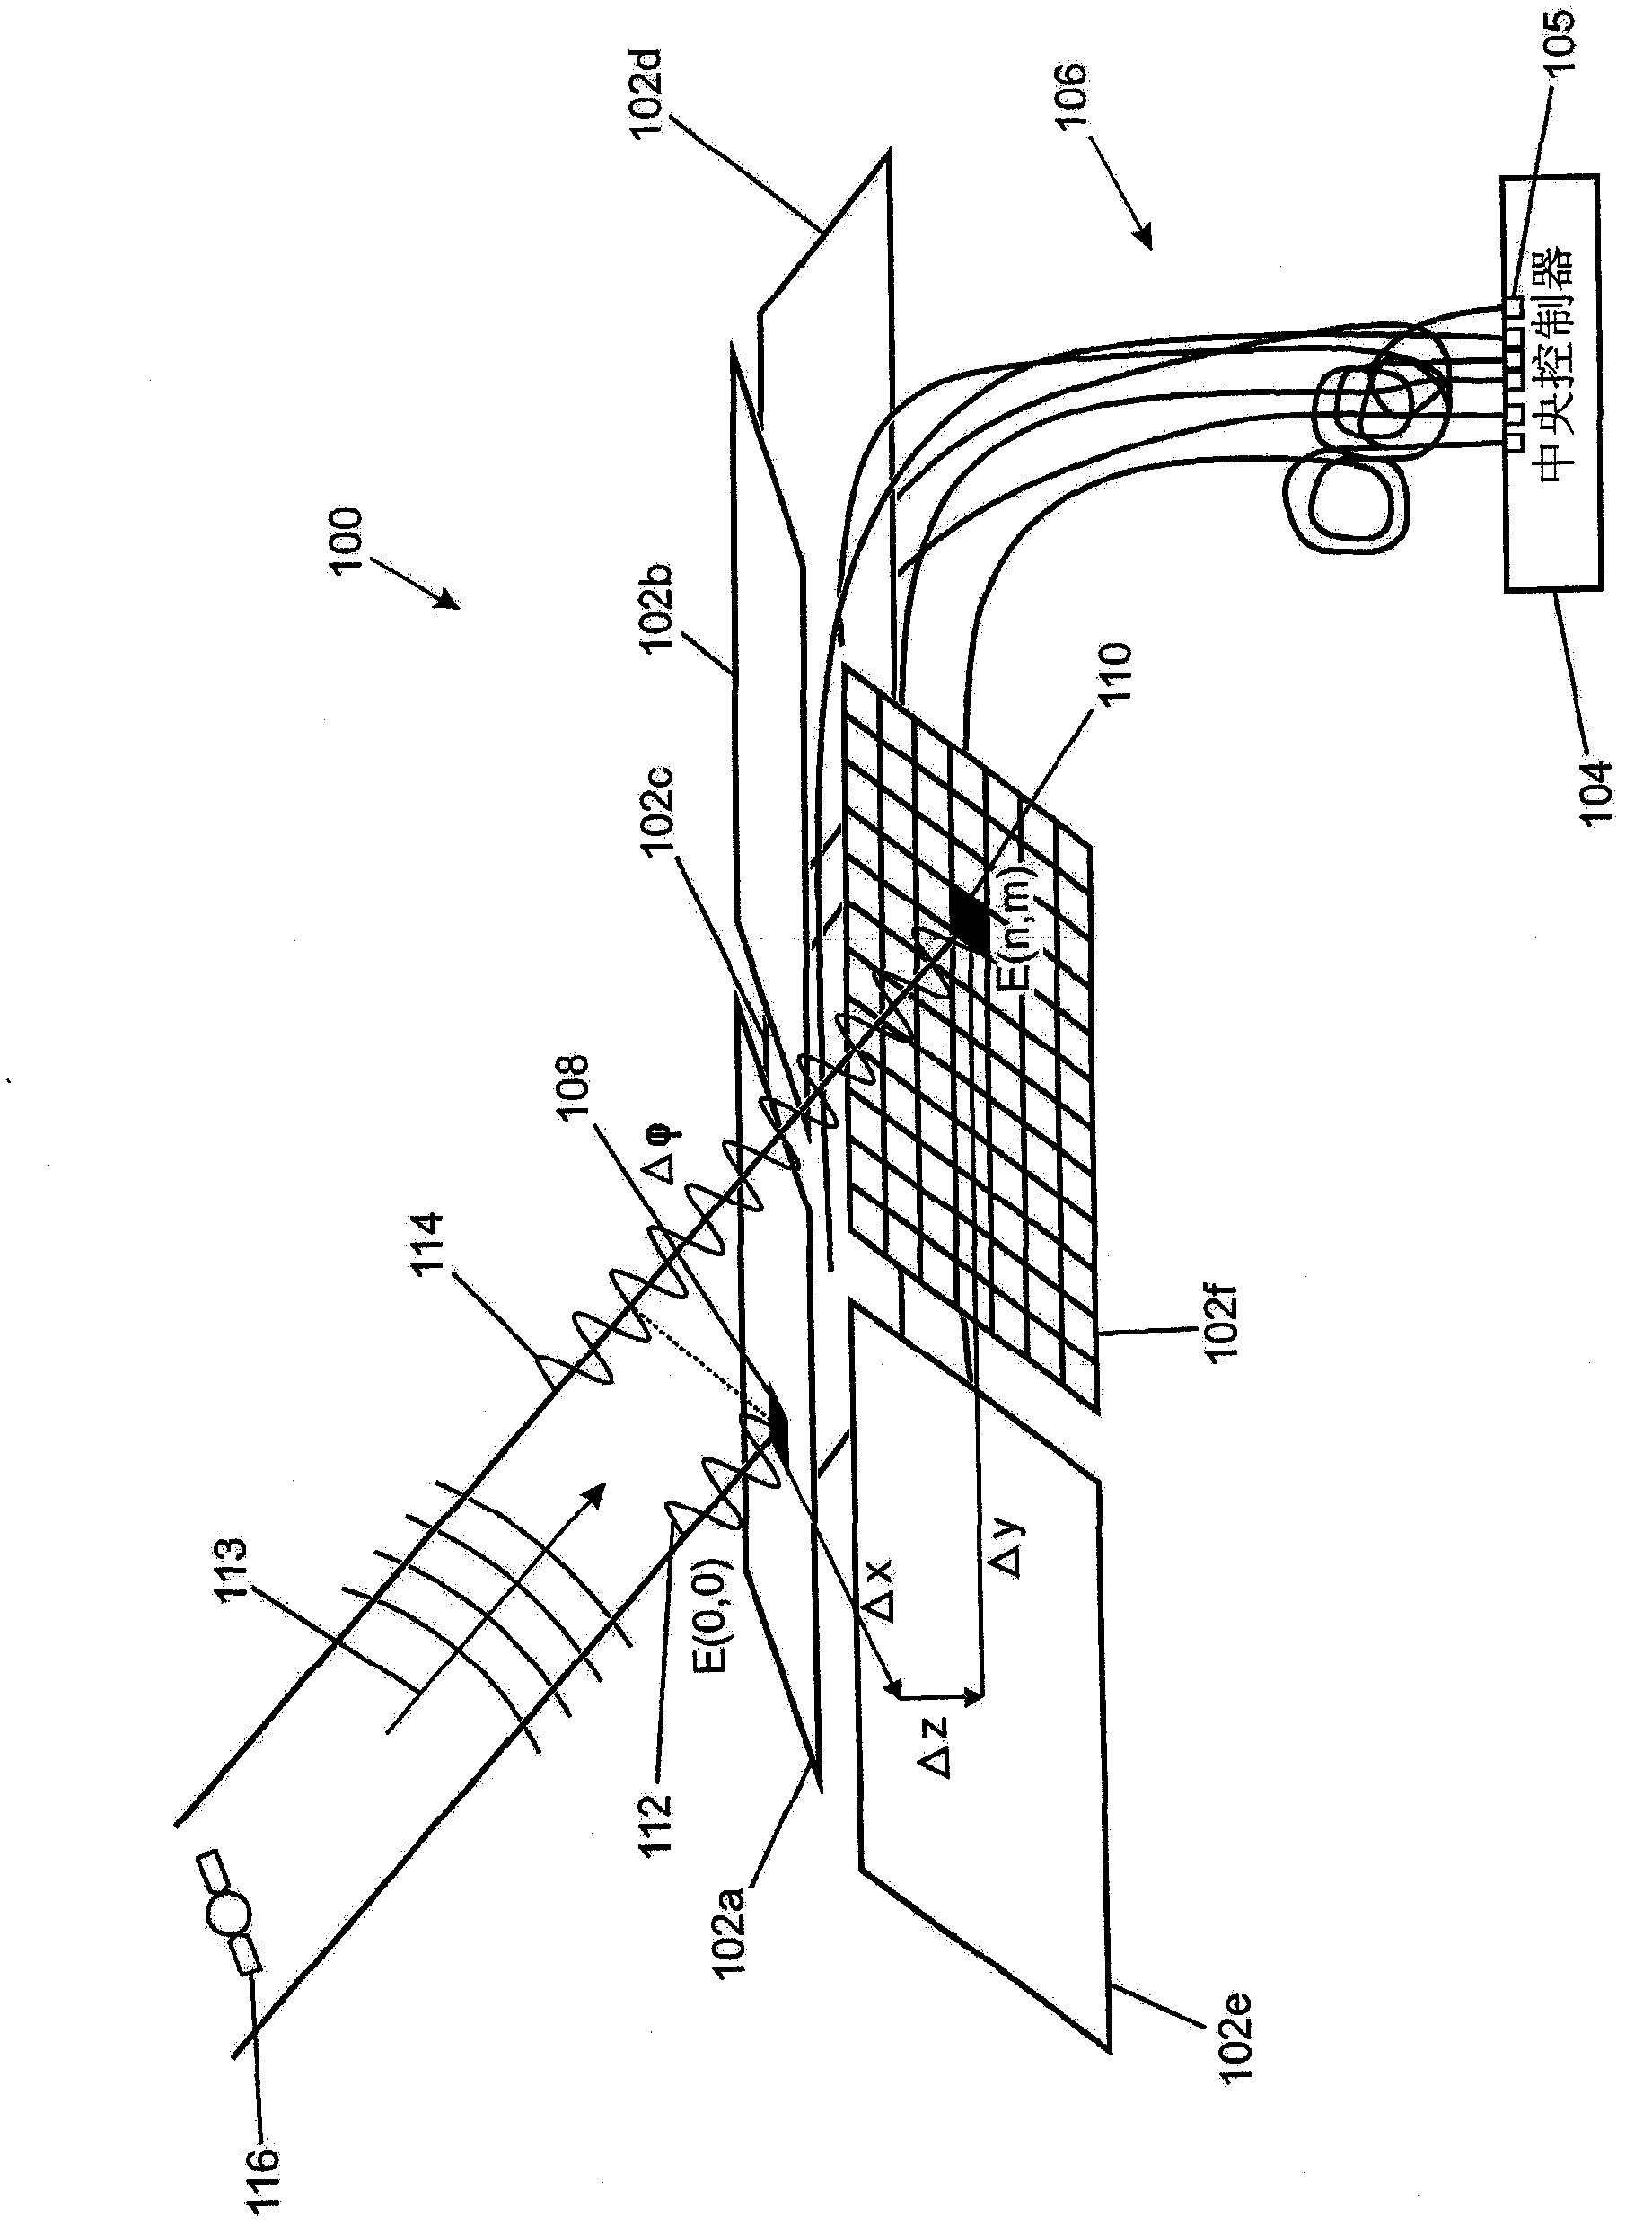 Phased array antenna and method of operating phased array antenna